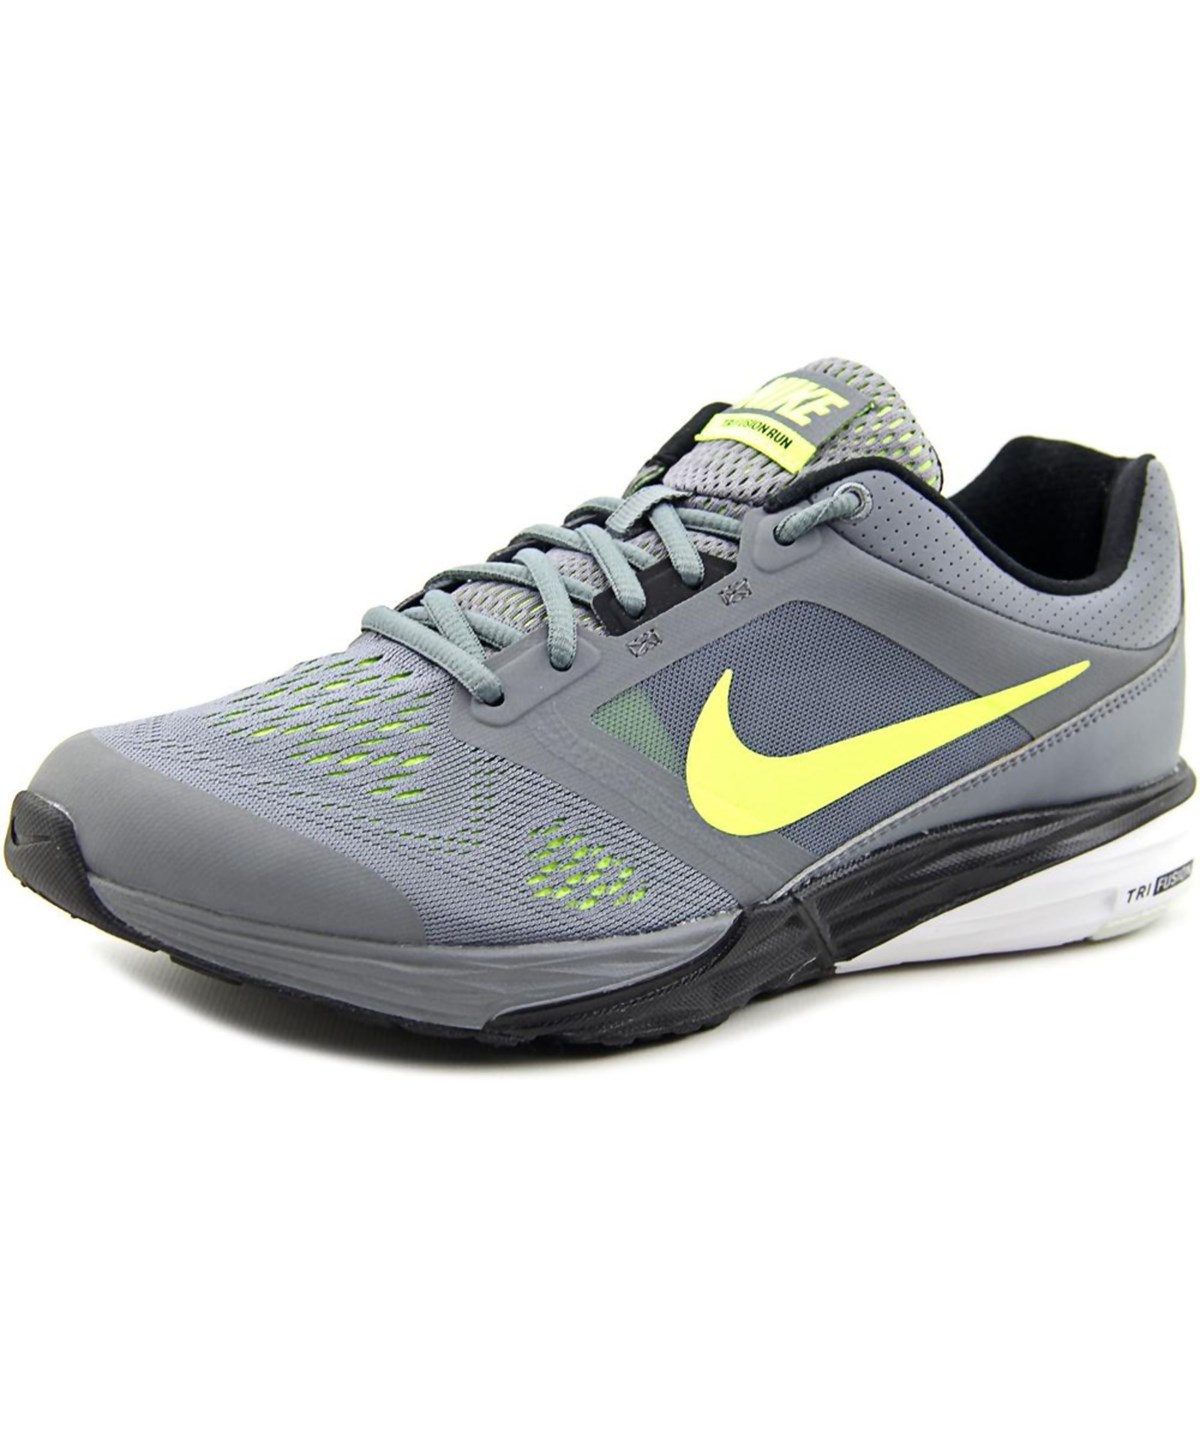 Nike Tri Fusion Run Round Toe Synthetic Running Shoe In Multiple Colors |  ModeSens